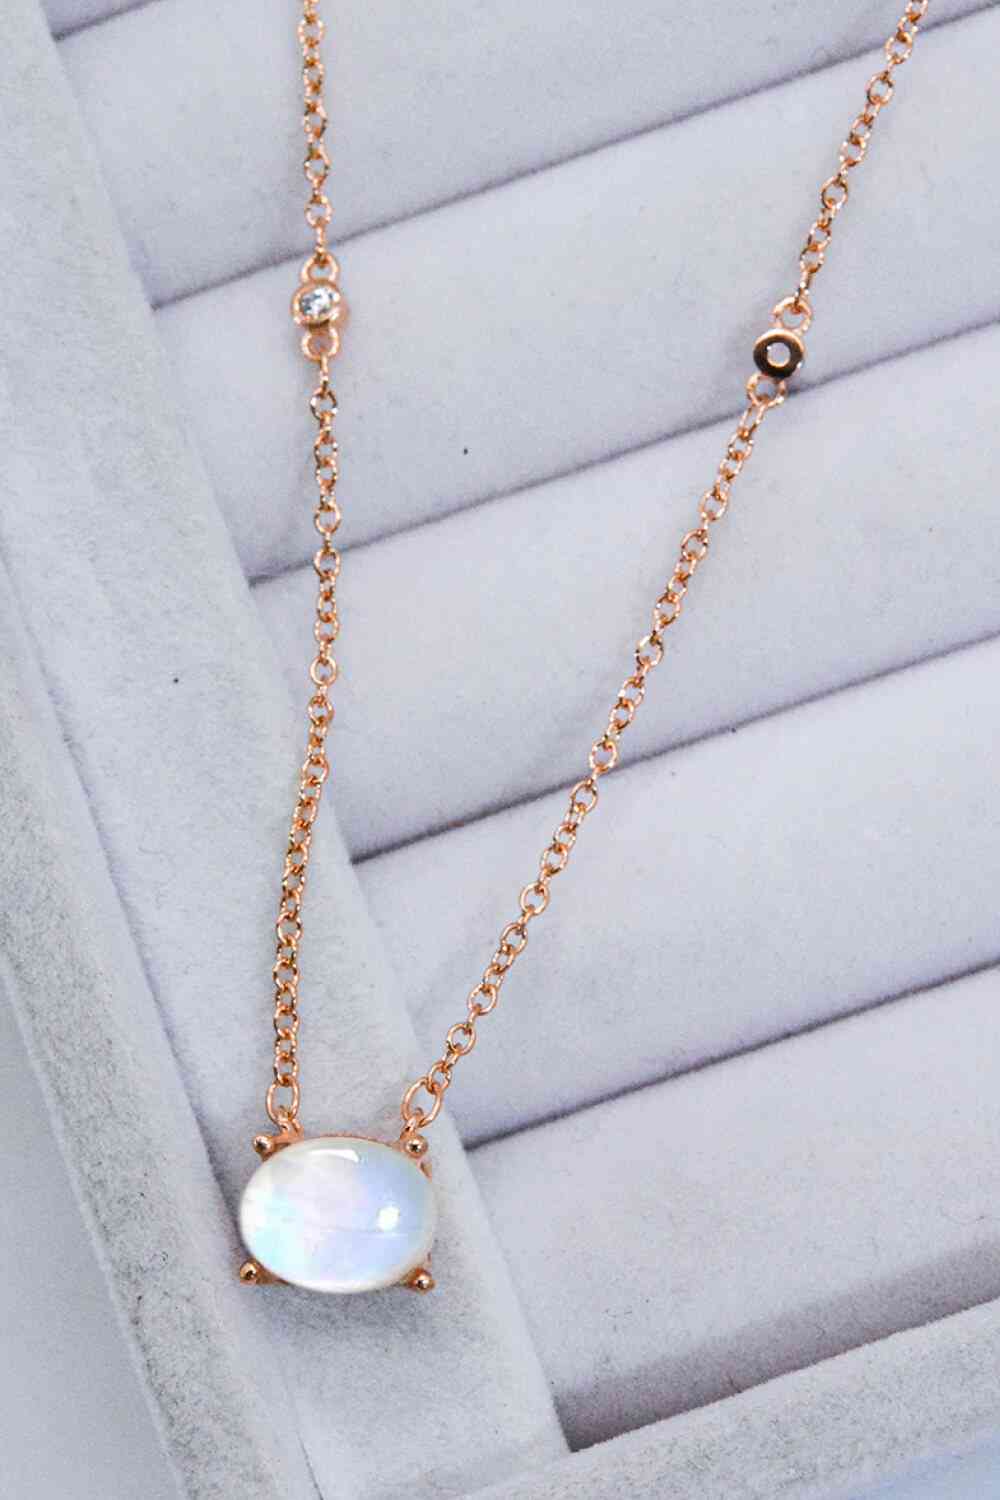 Oval Moonstone Pendant Necklace